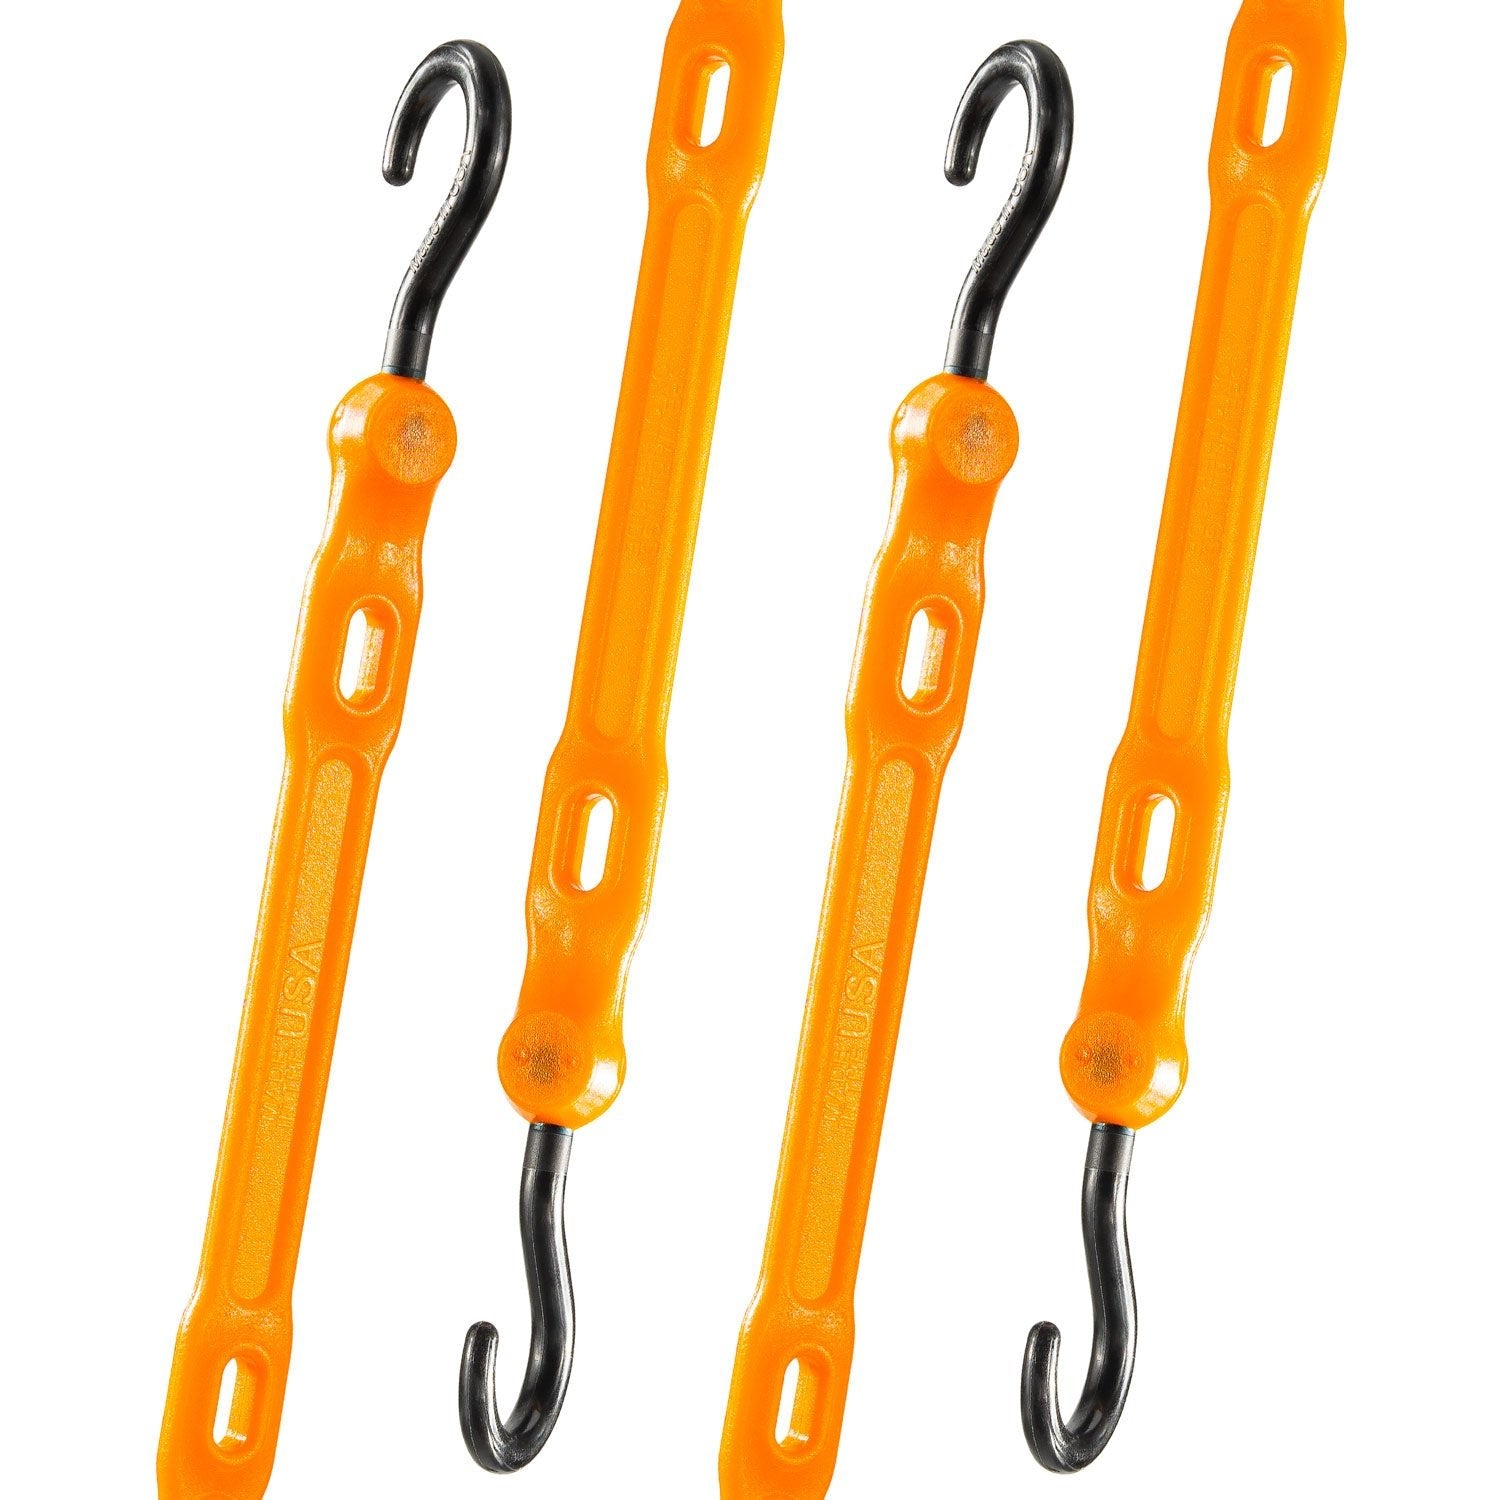 Boat Dock Tie Bungee Cord, Hook and Loop Ends, Made in USA, 2 Pack